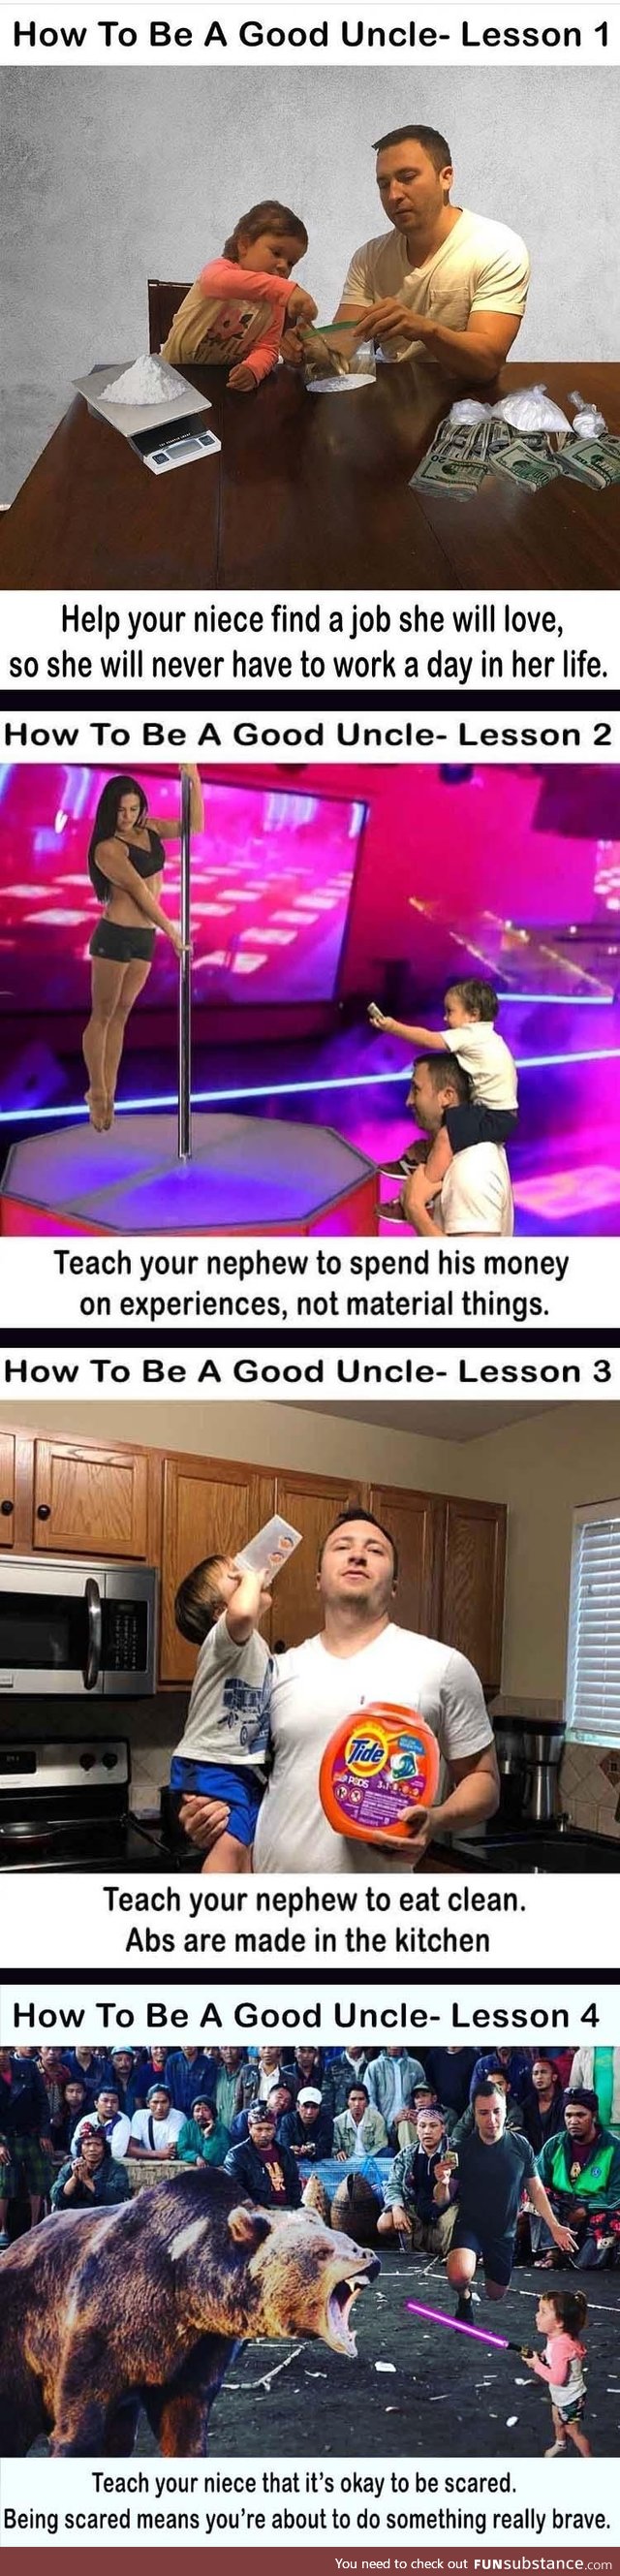 How to be a good uncle